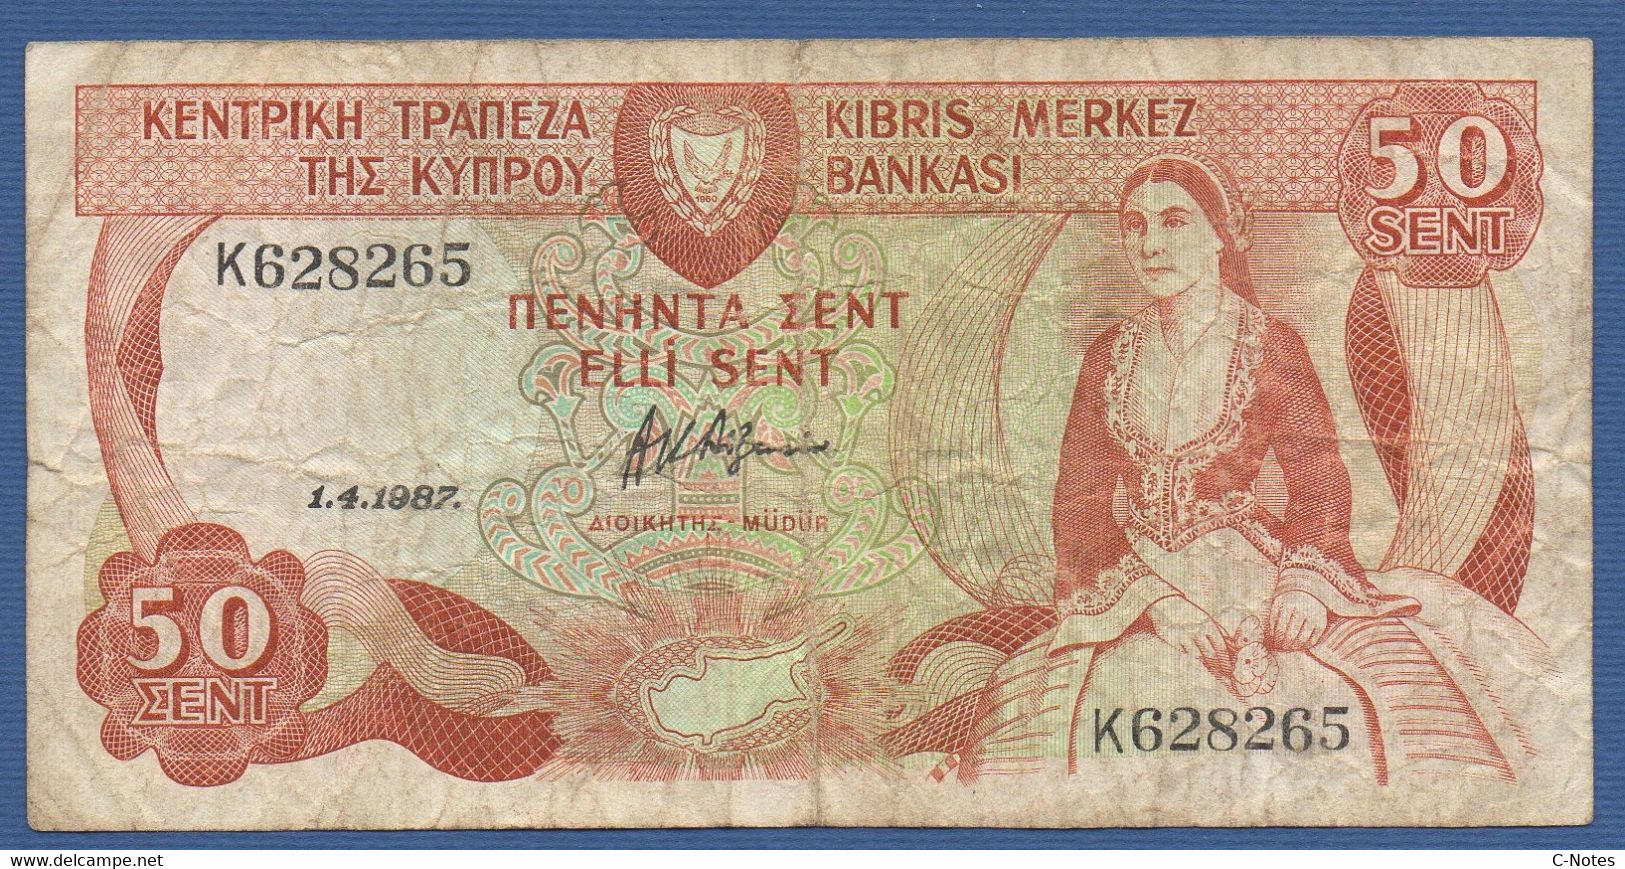 CYPRUS - P.52a – 50 Cents / Sent 01.04.1987 Circulated Serie K628265 - Cipro